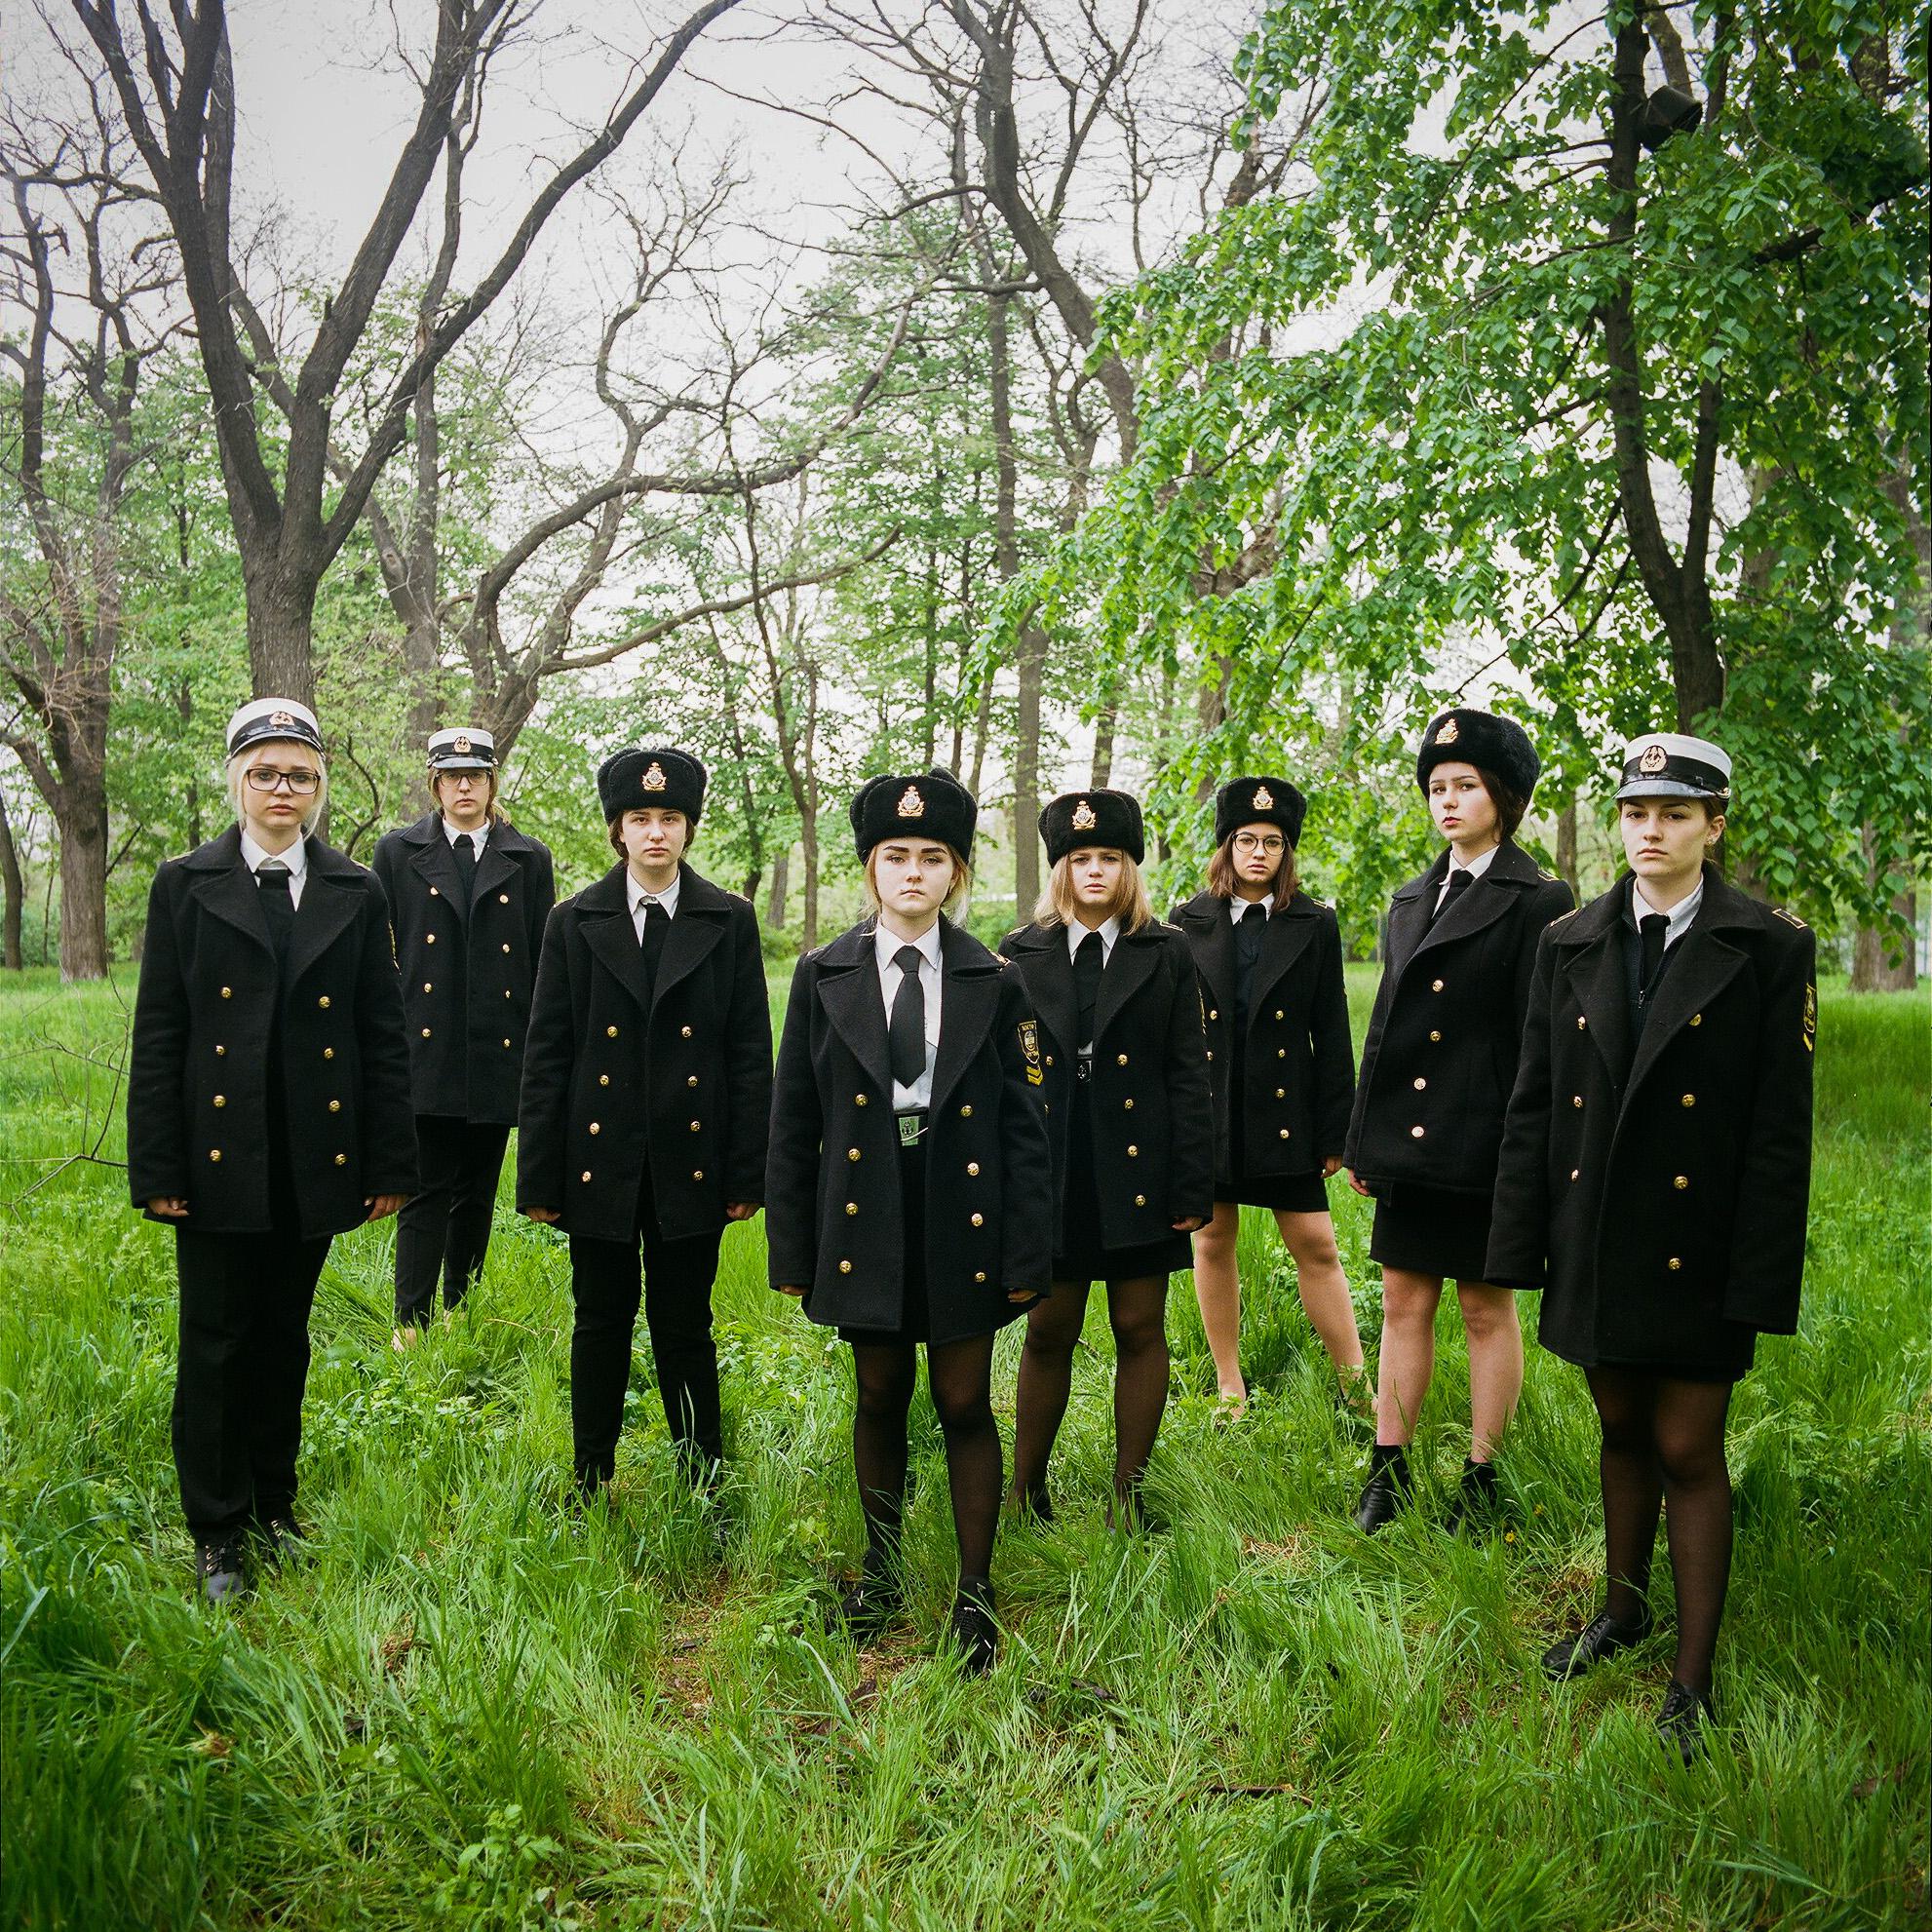 Michal Chelbin Portrait Photograph - Young Cadets (I)